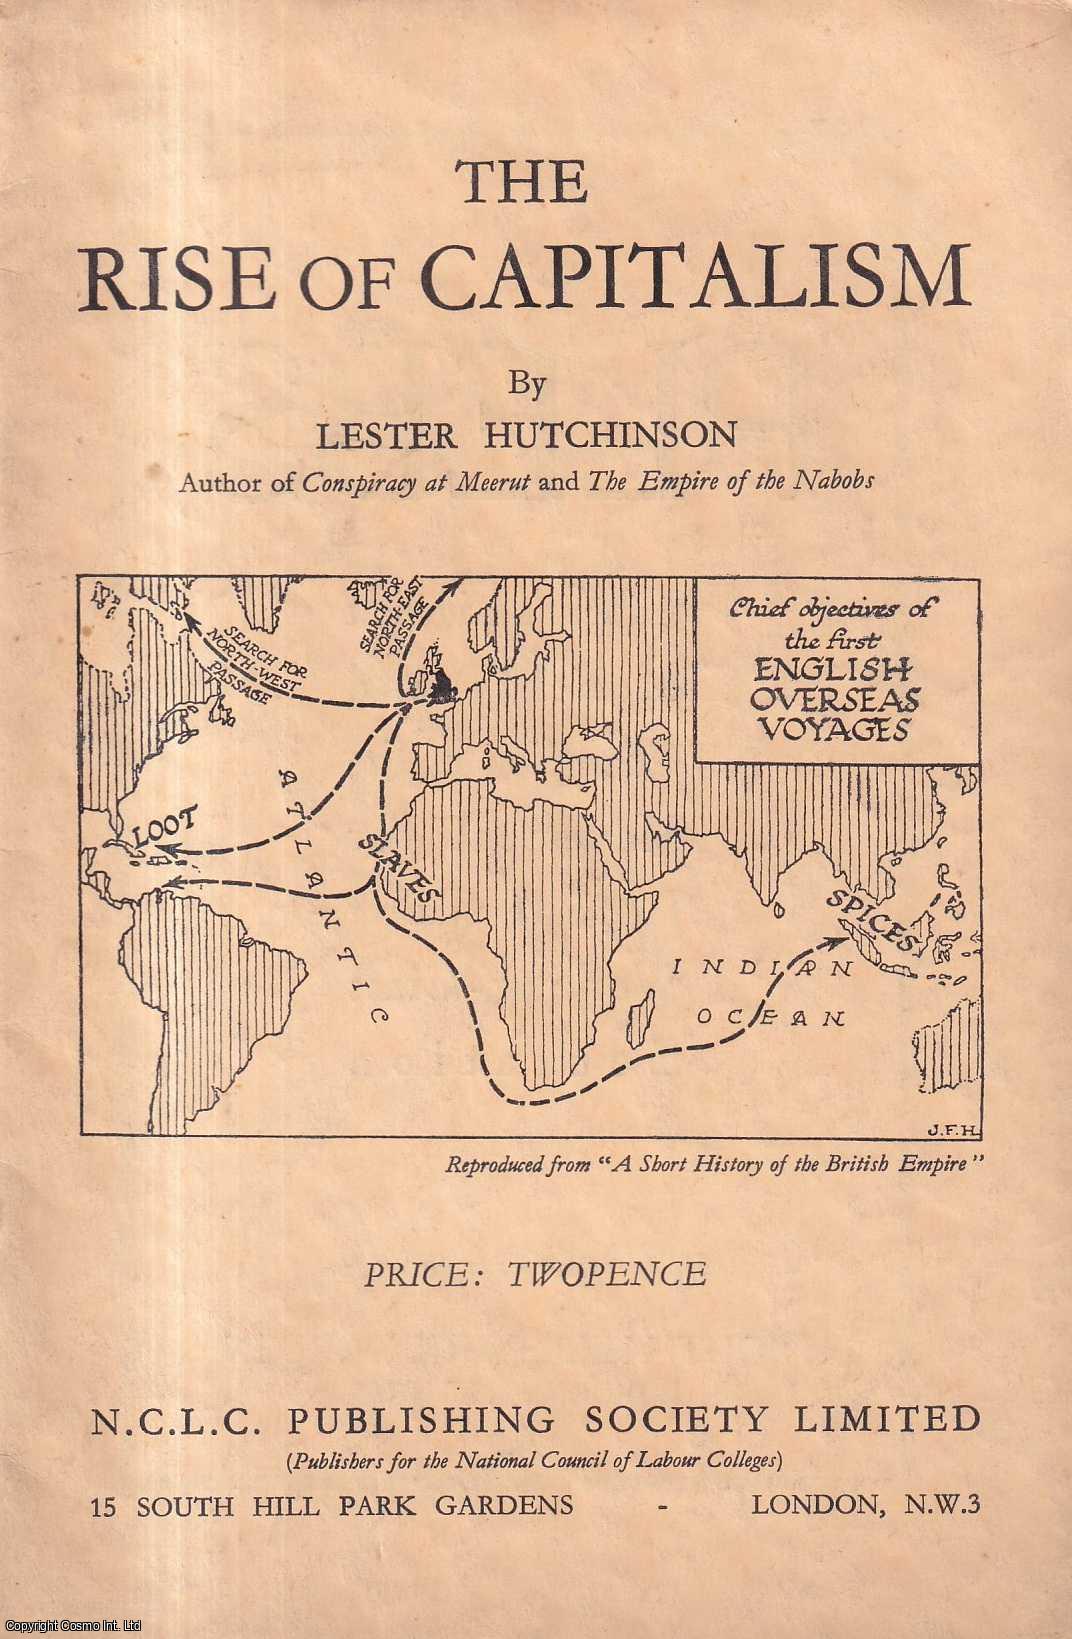 Lester Hutchinson - The Rise of Capitalism. Published by National Council of Labour Colleges 1941.